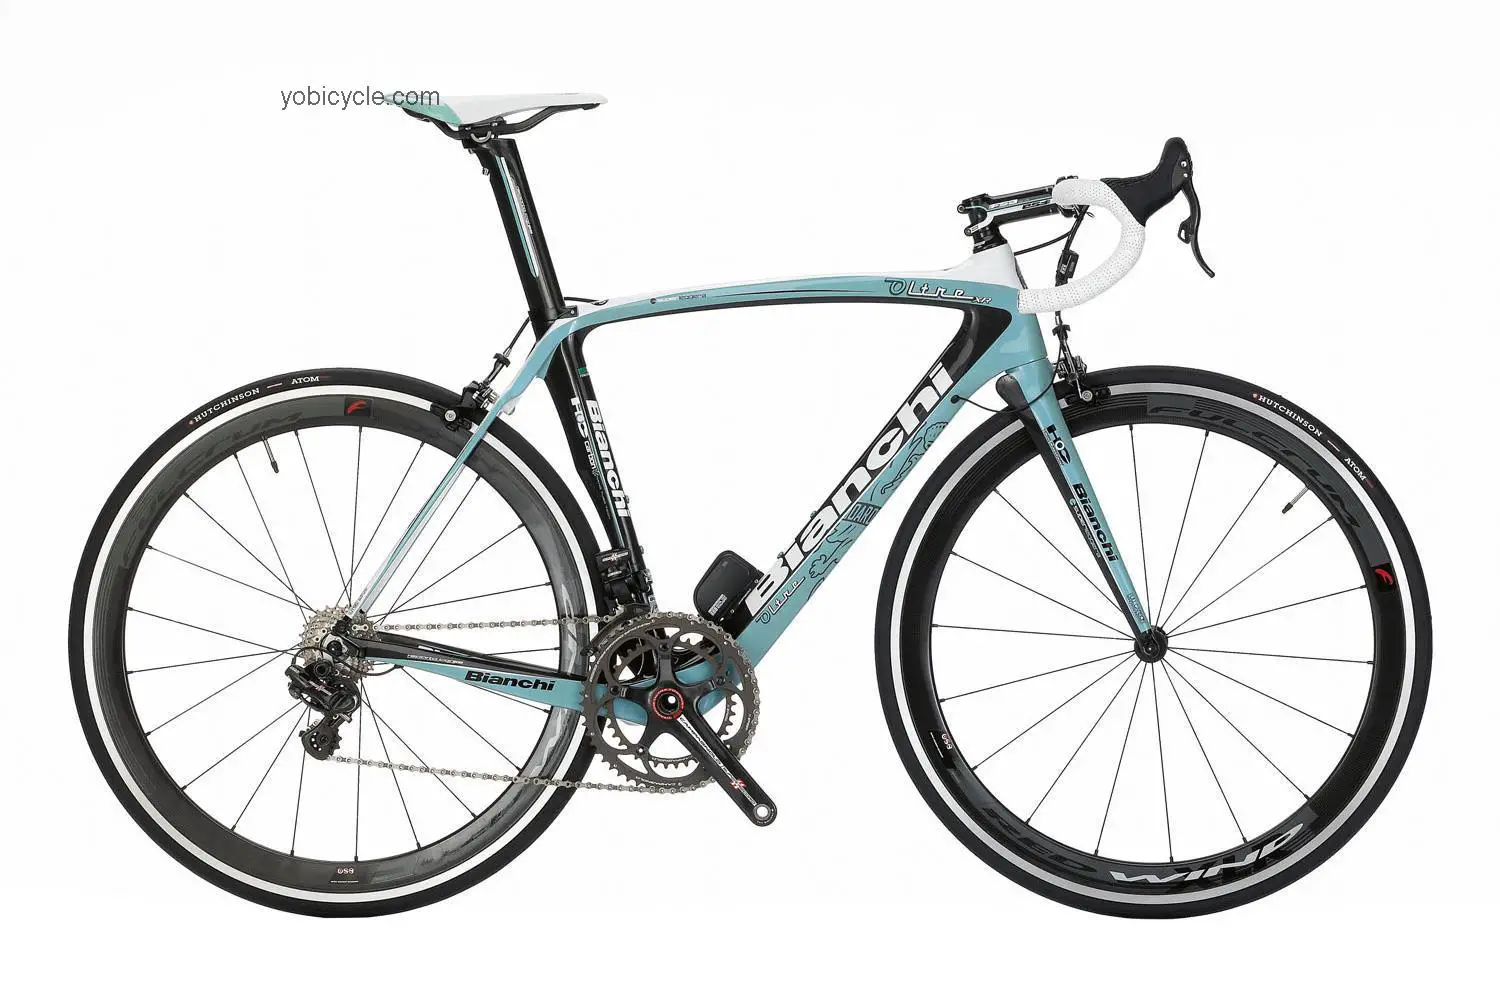 Bianchi Oltre XR Super Record EPS competitors and comparison tool online specs and performance